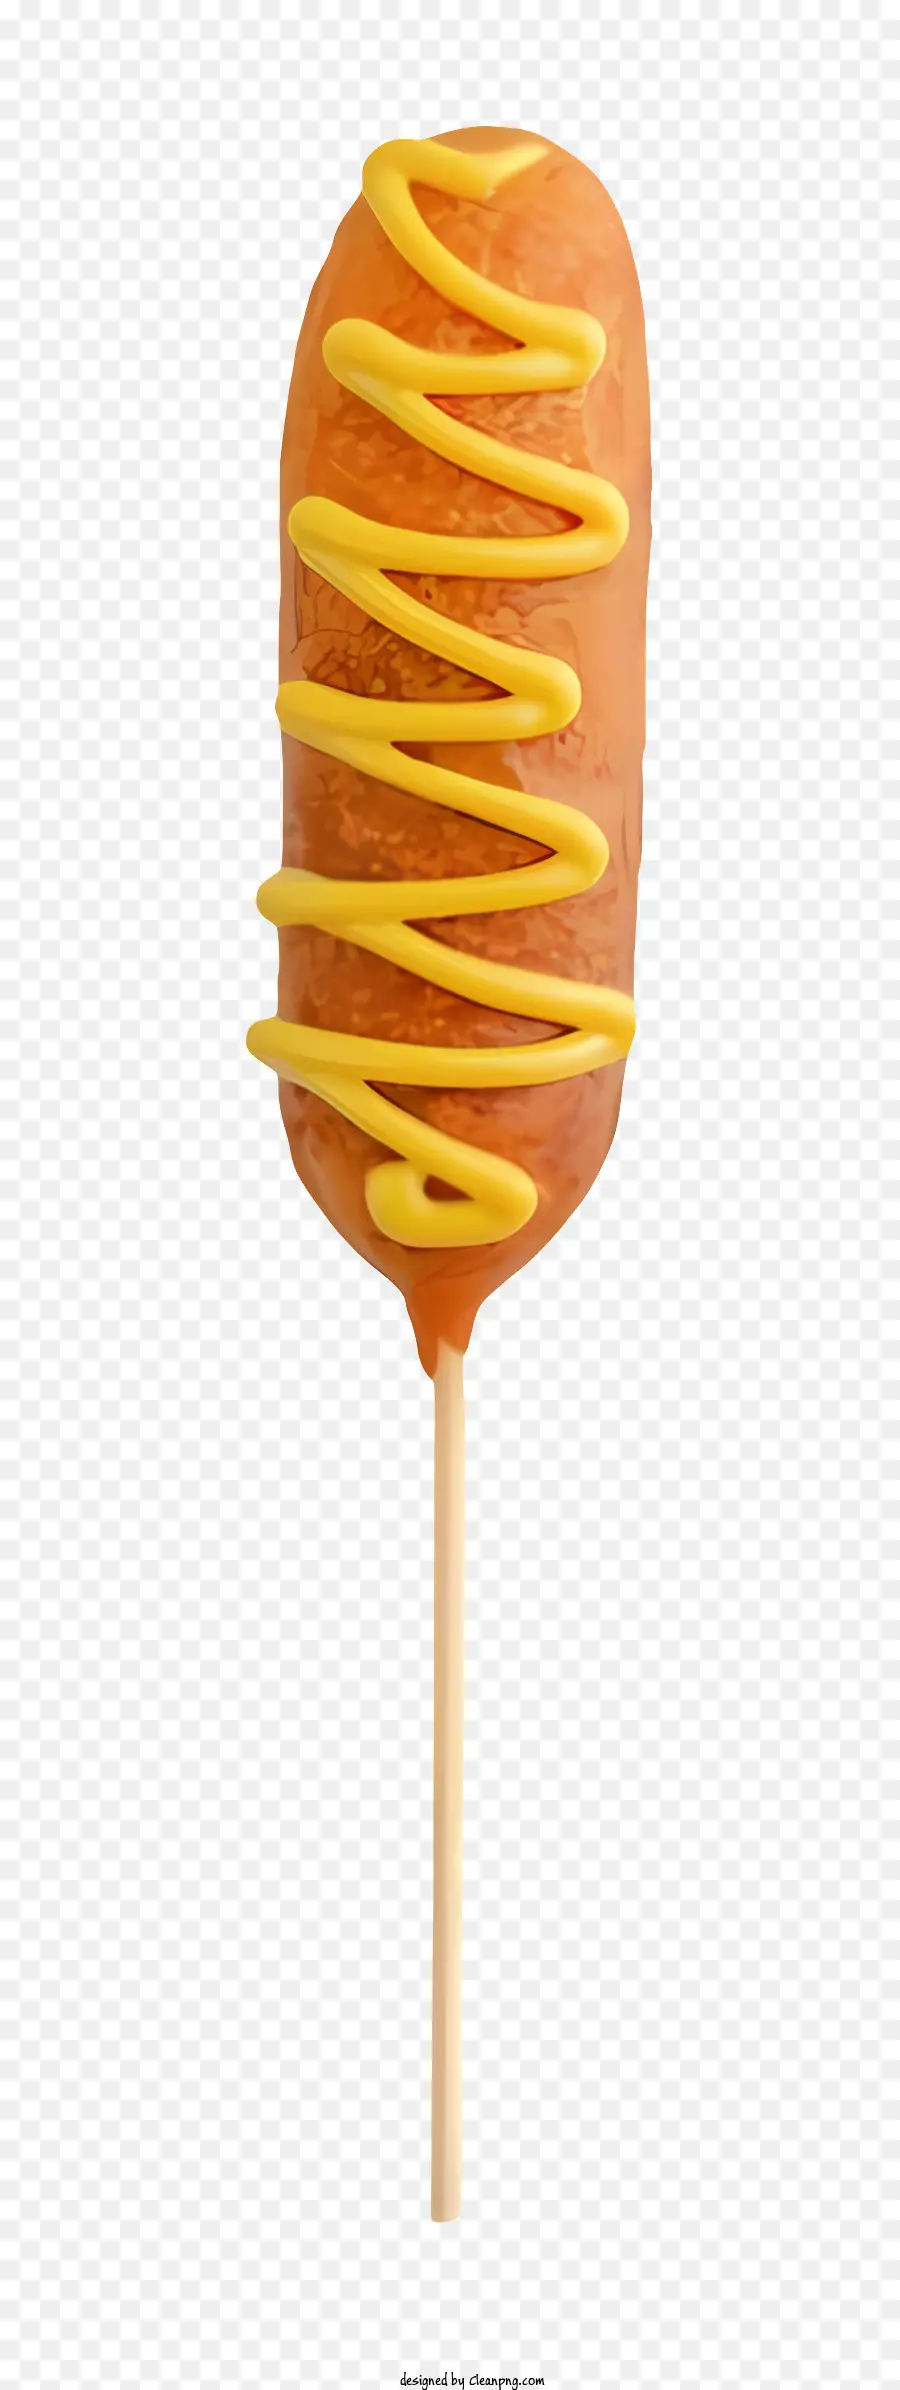 caramel lollipop candy on a stick yellow swirled candy lollipop with frosting caramel flavored candy